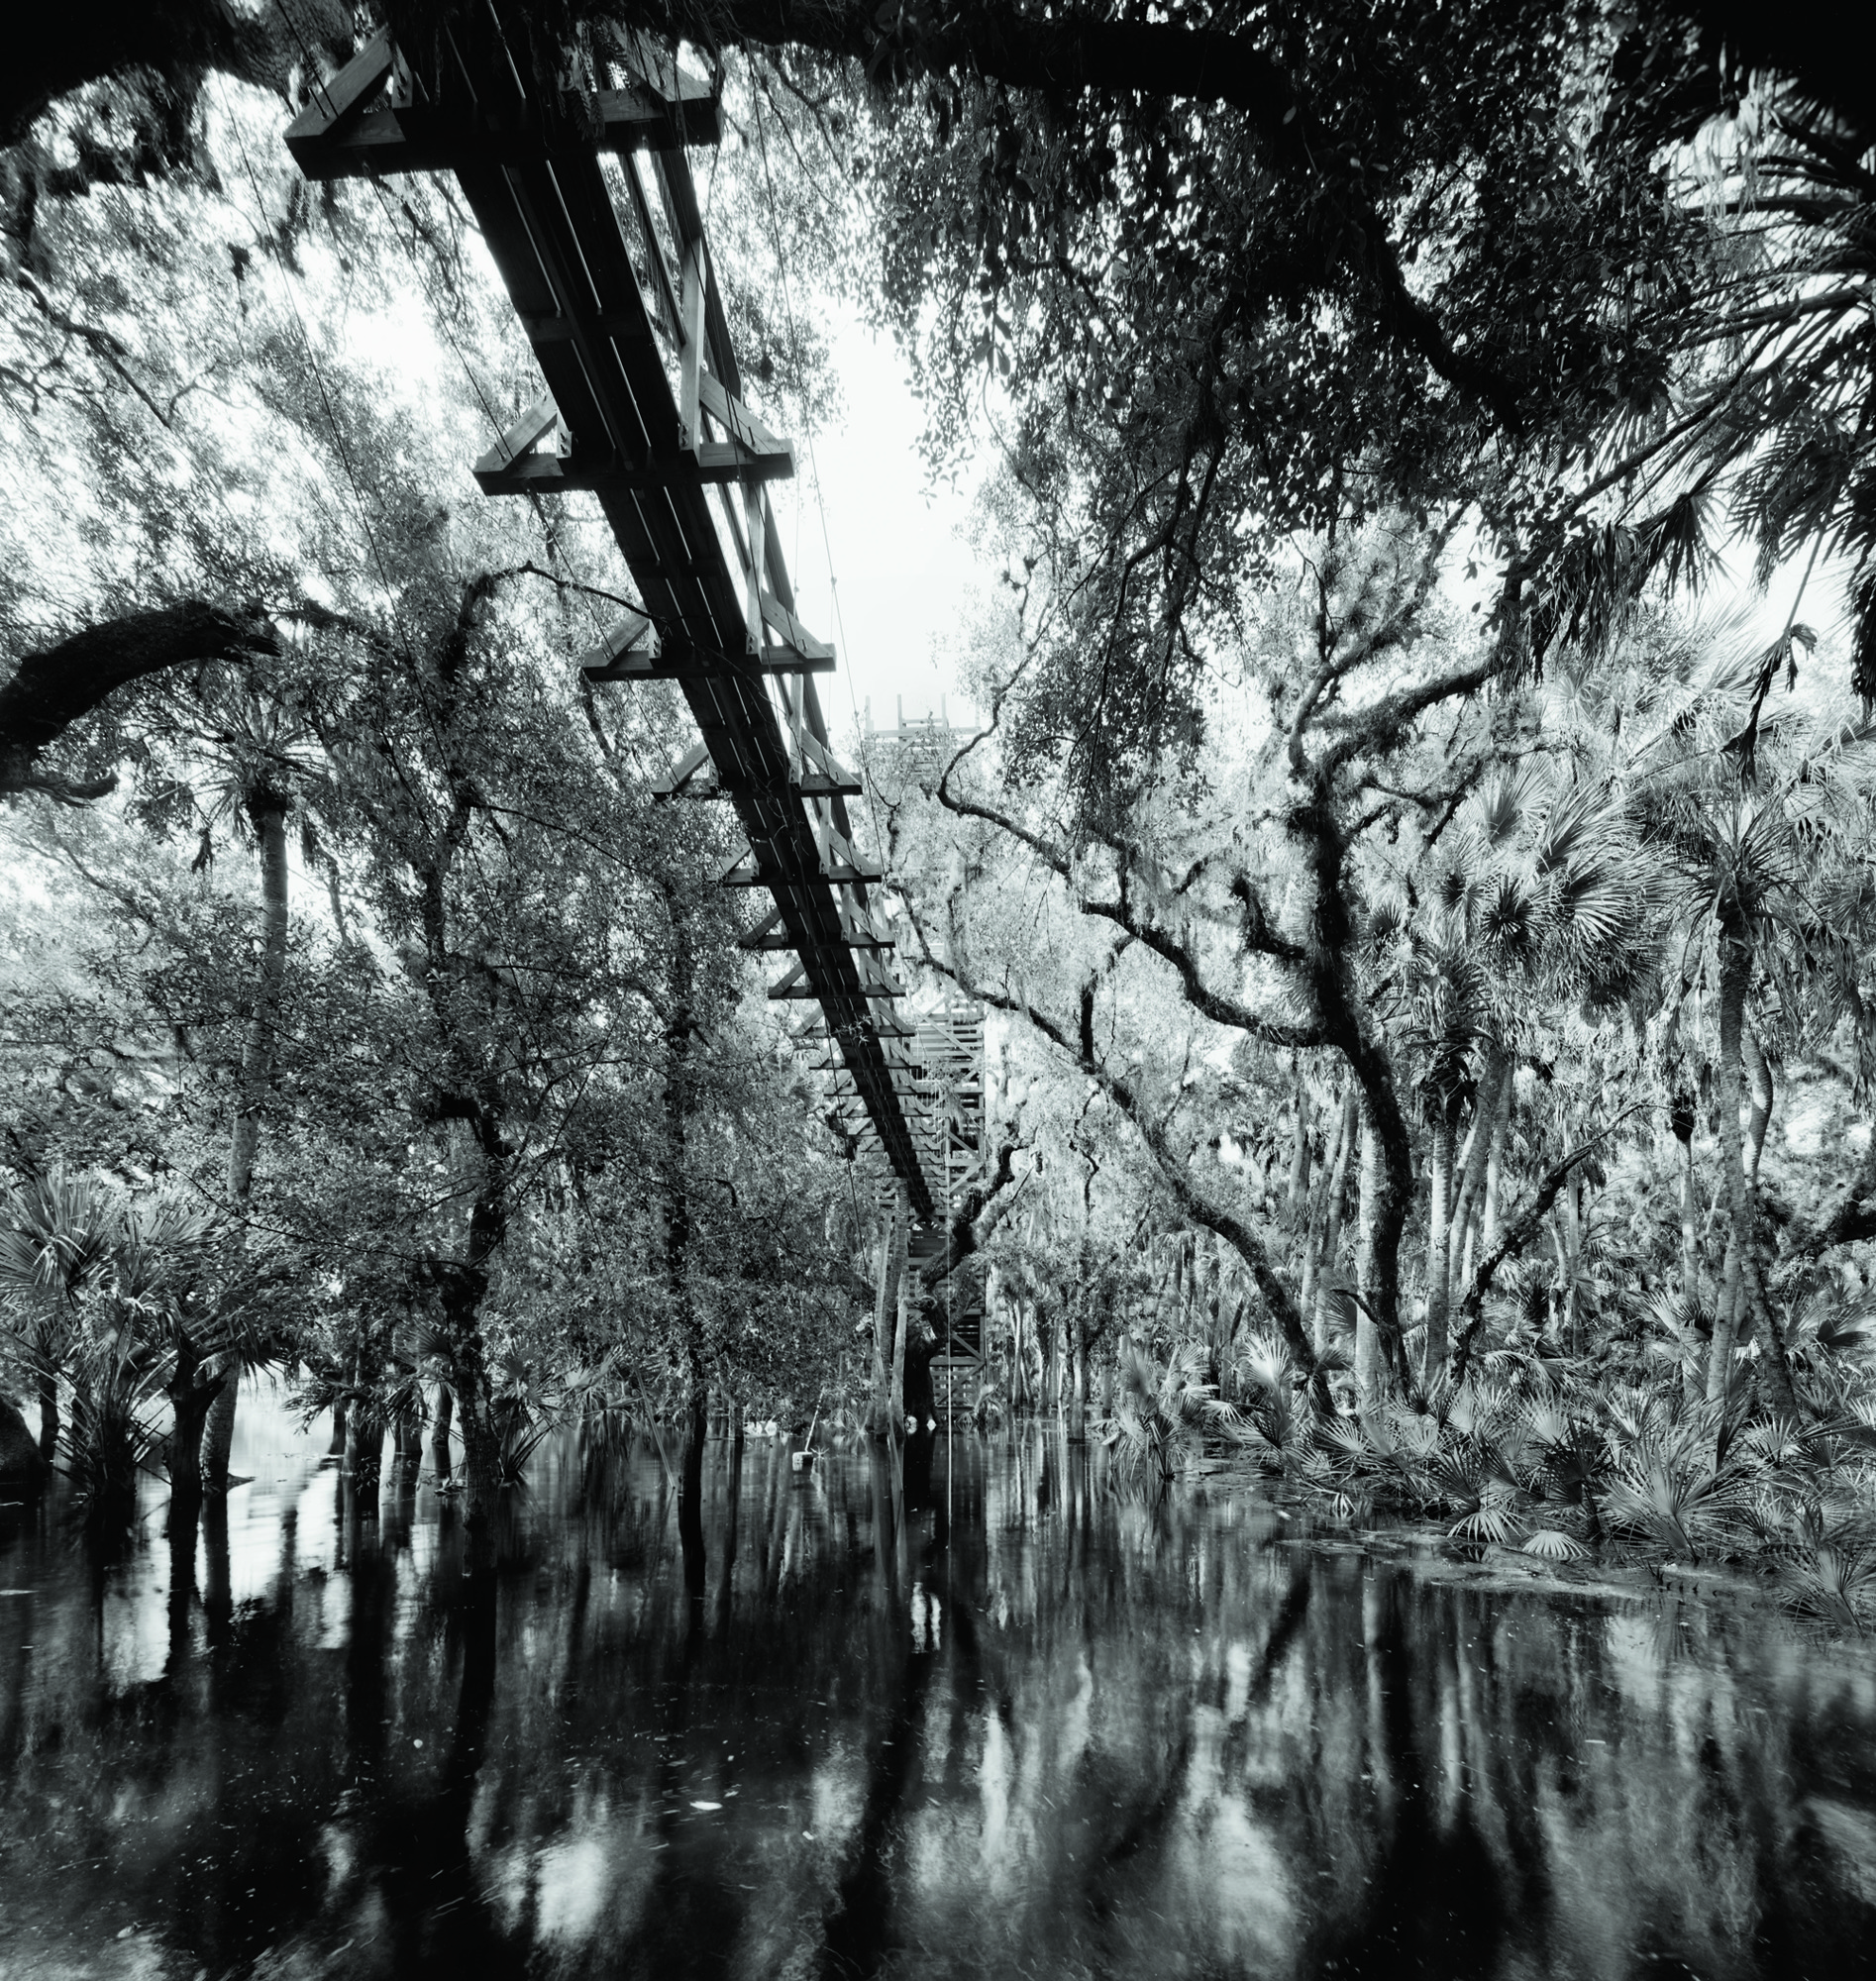 The Myakka canopy is one of the most popular tourist attractions for visitors to the park. Photo by Clyde Butcher